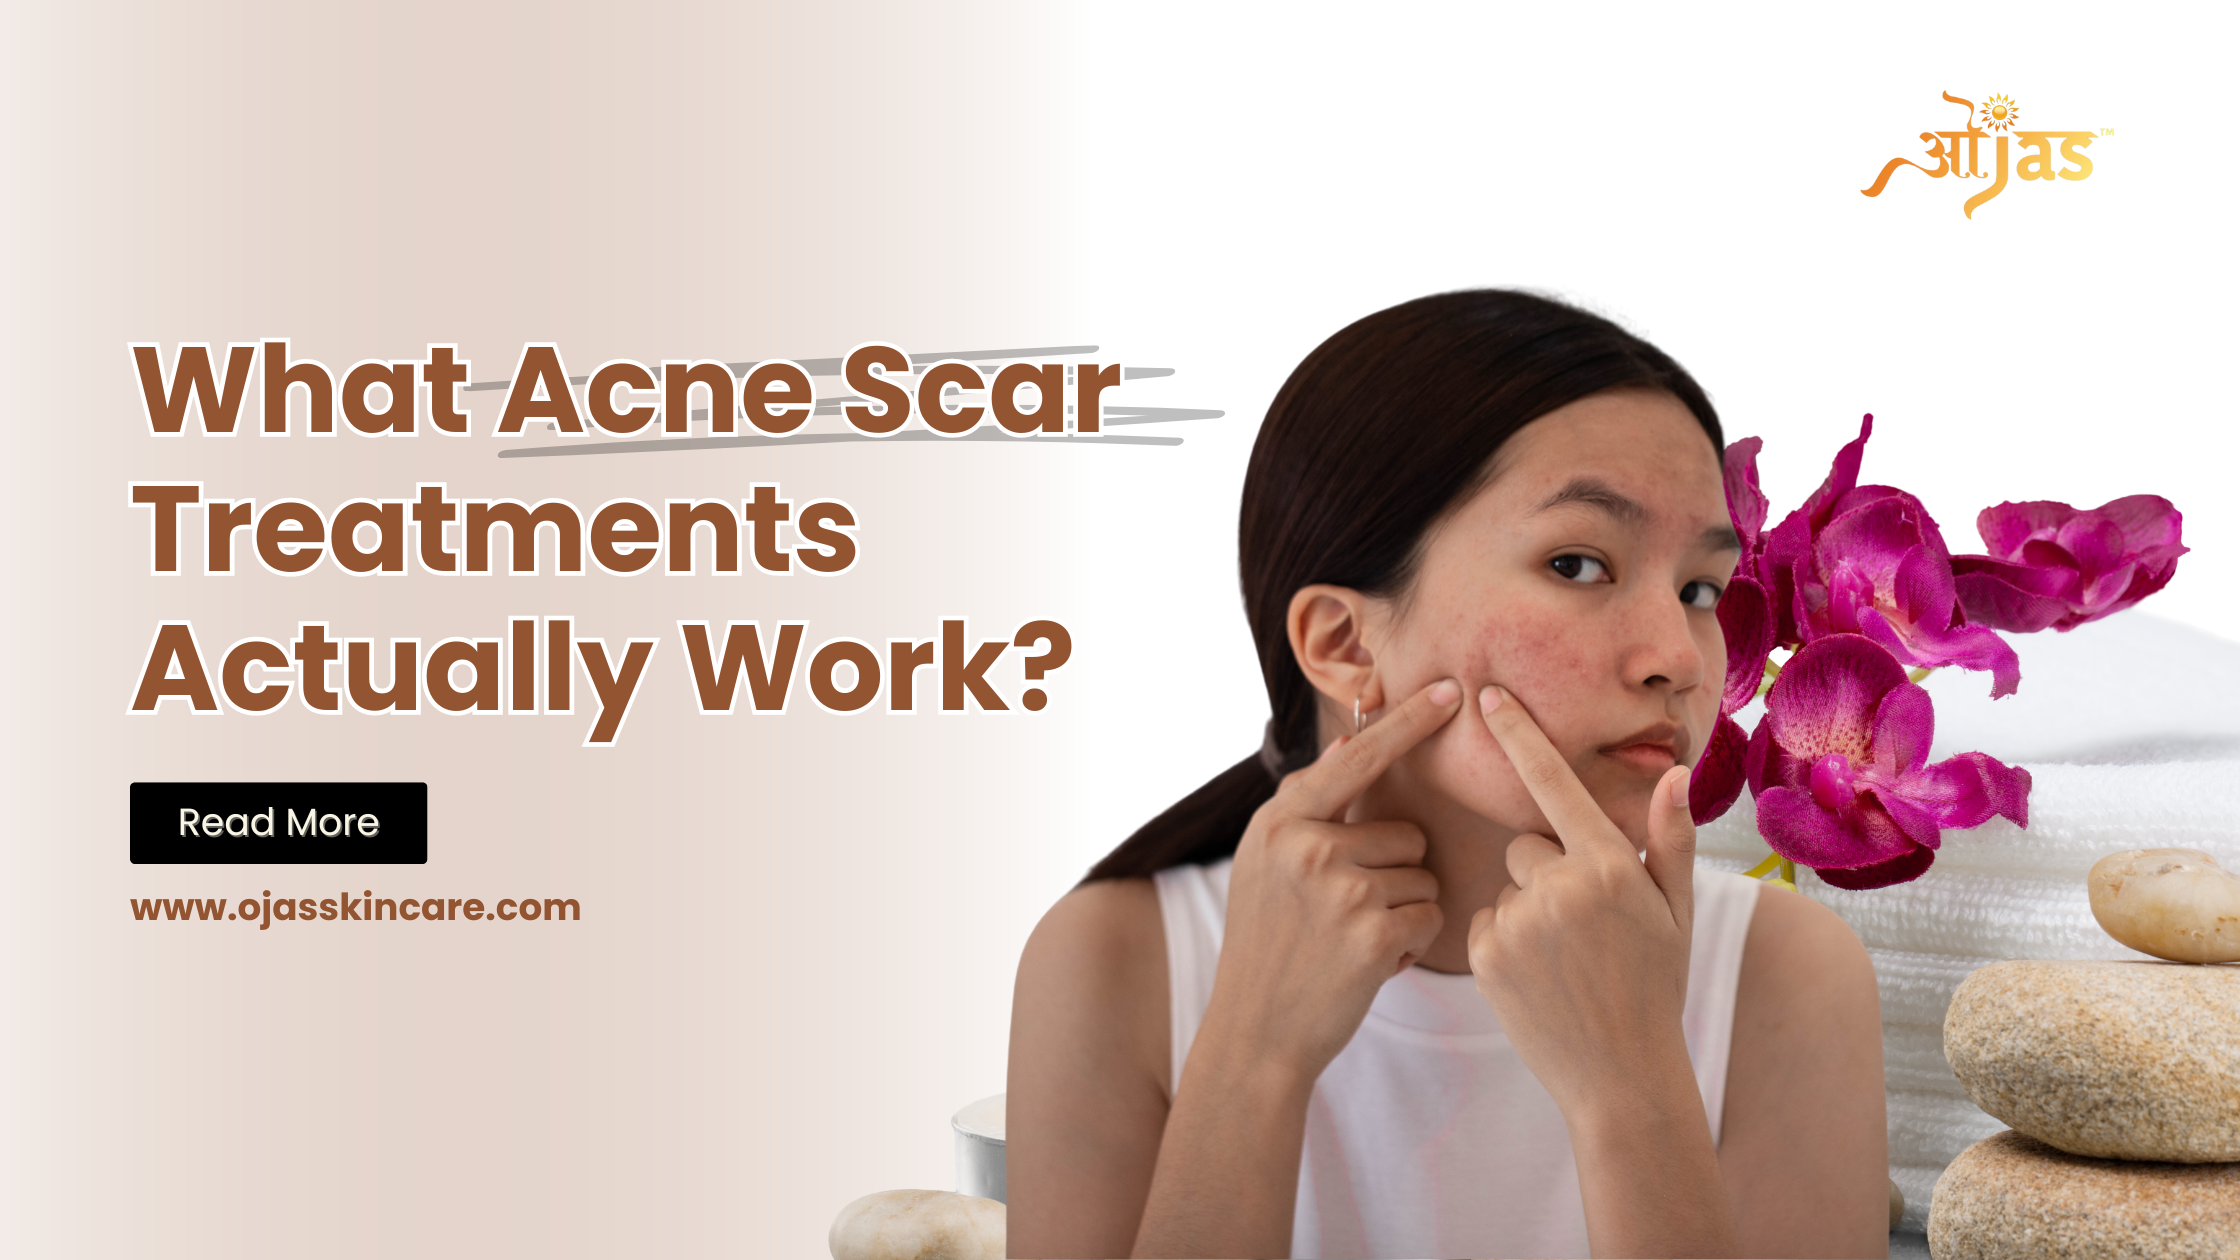 What Acne Scar Treatments Actually Work?